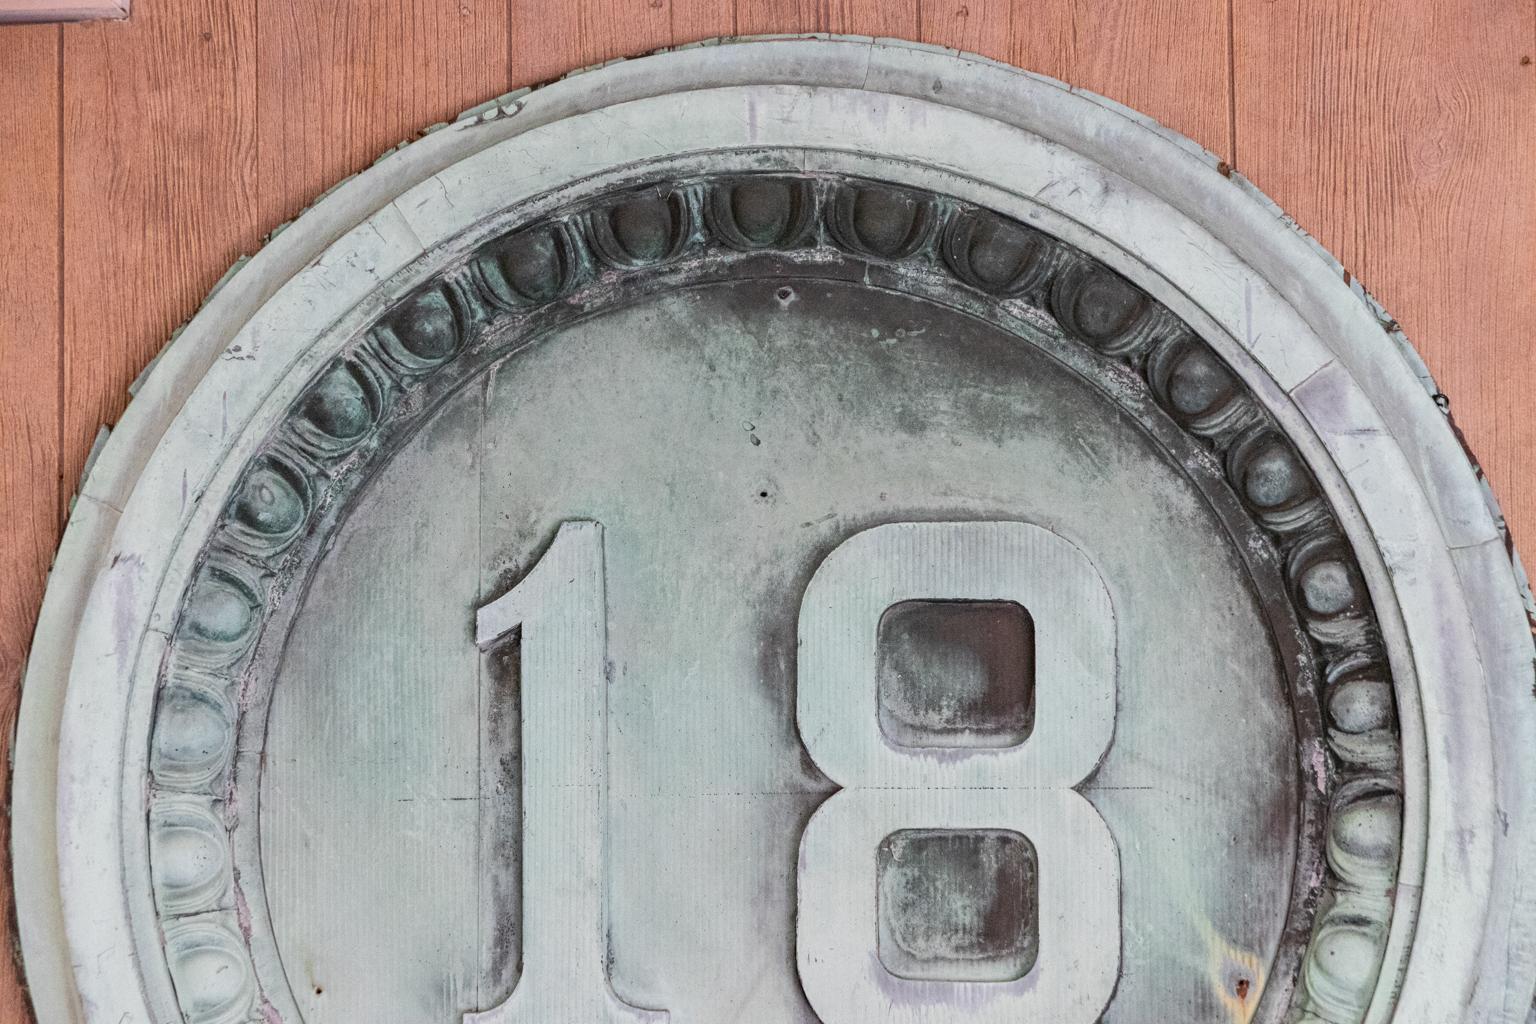 Circa 19th century salvaged copper architectural facade markers with the date 1886 framed by egg-and-dart trim. Please note of wear consistent with age and exposure to the elements including oxidation and patina to the metal.